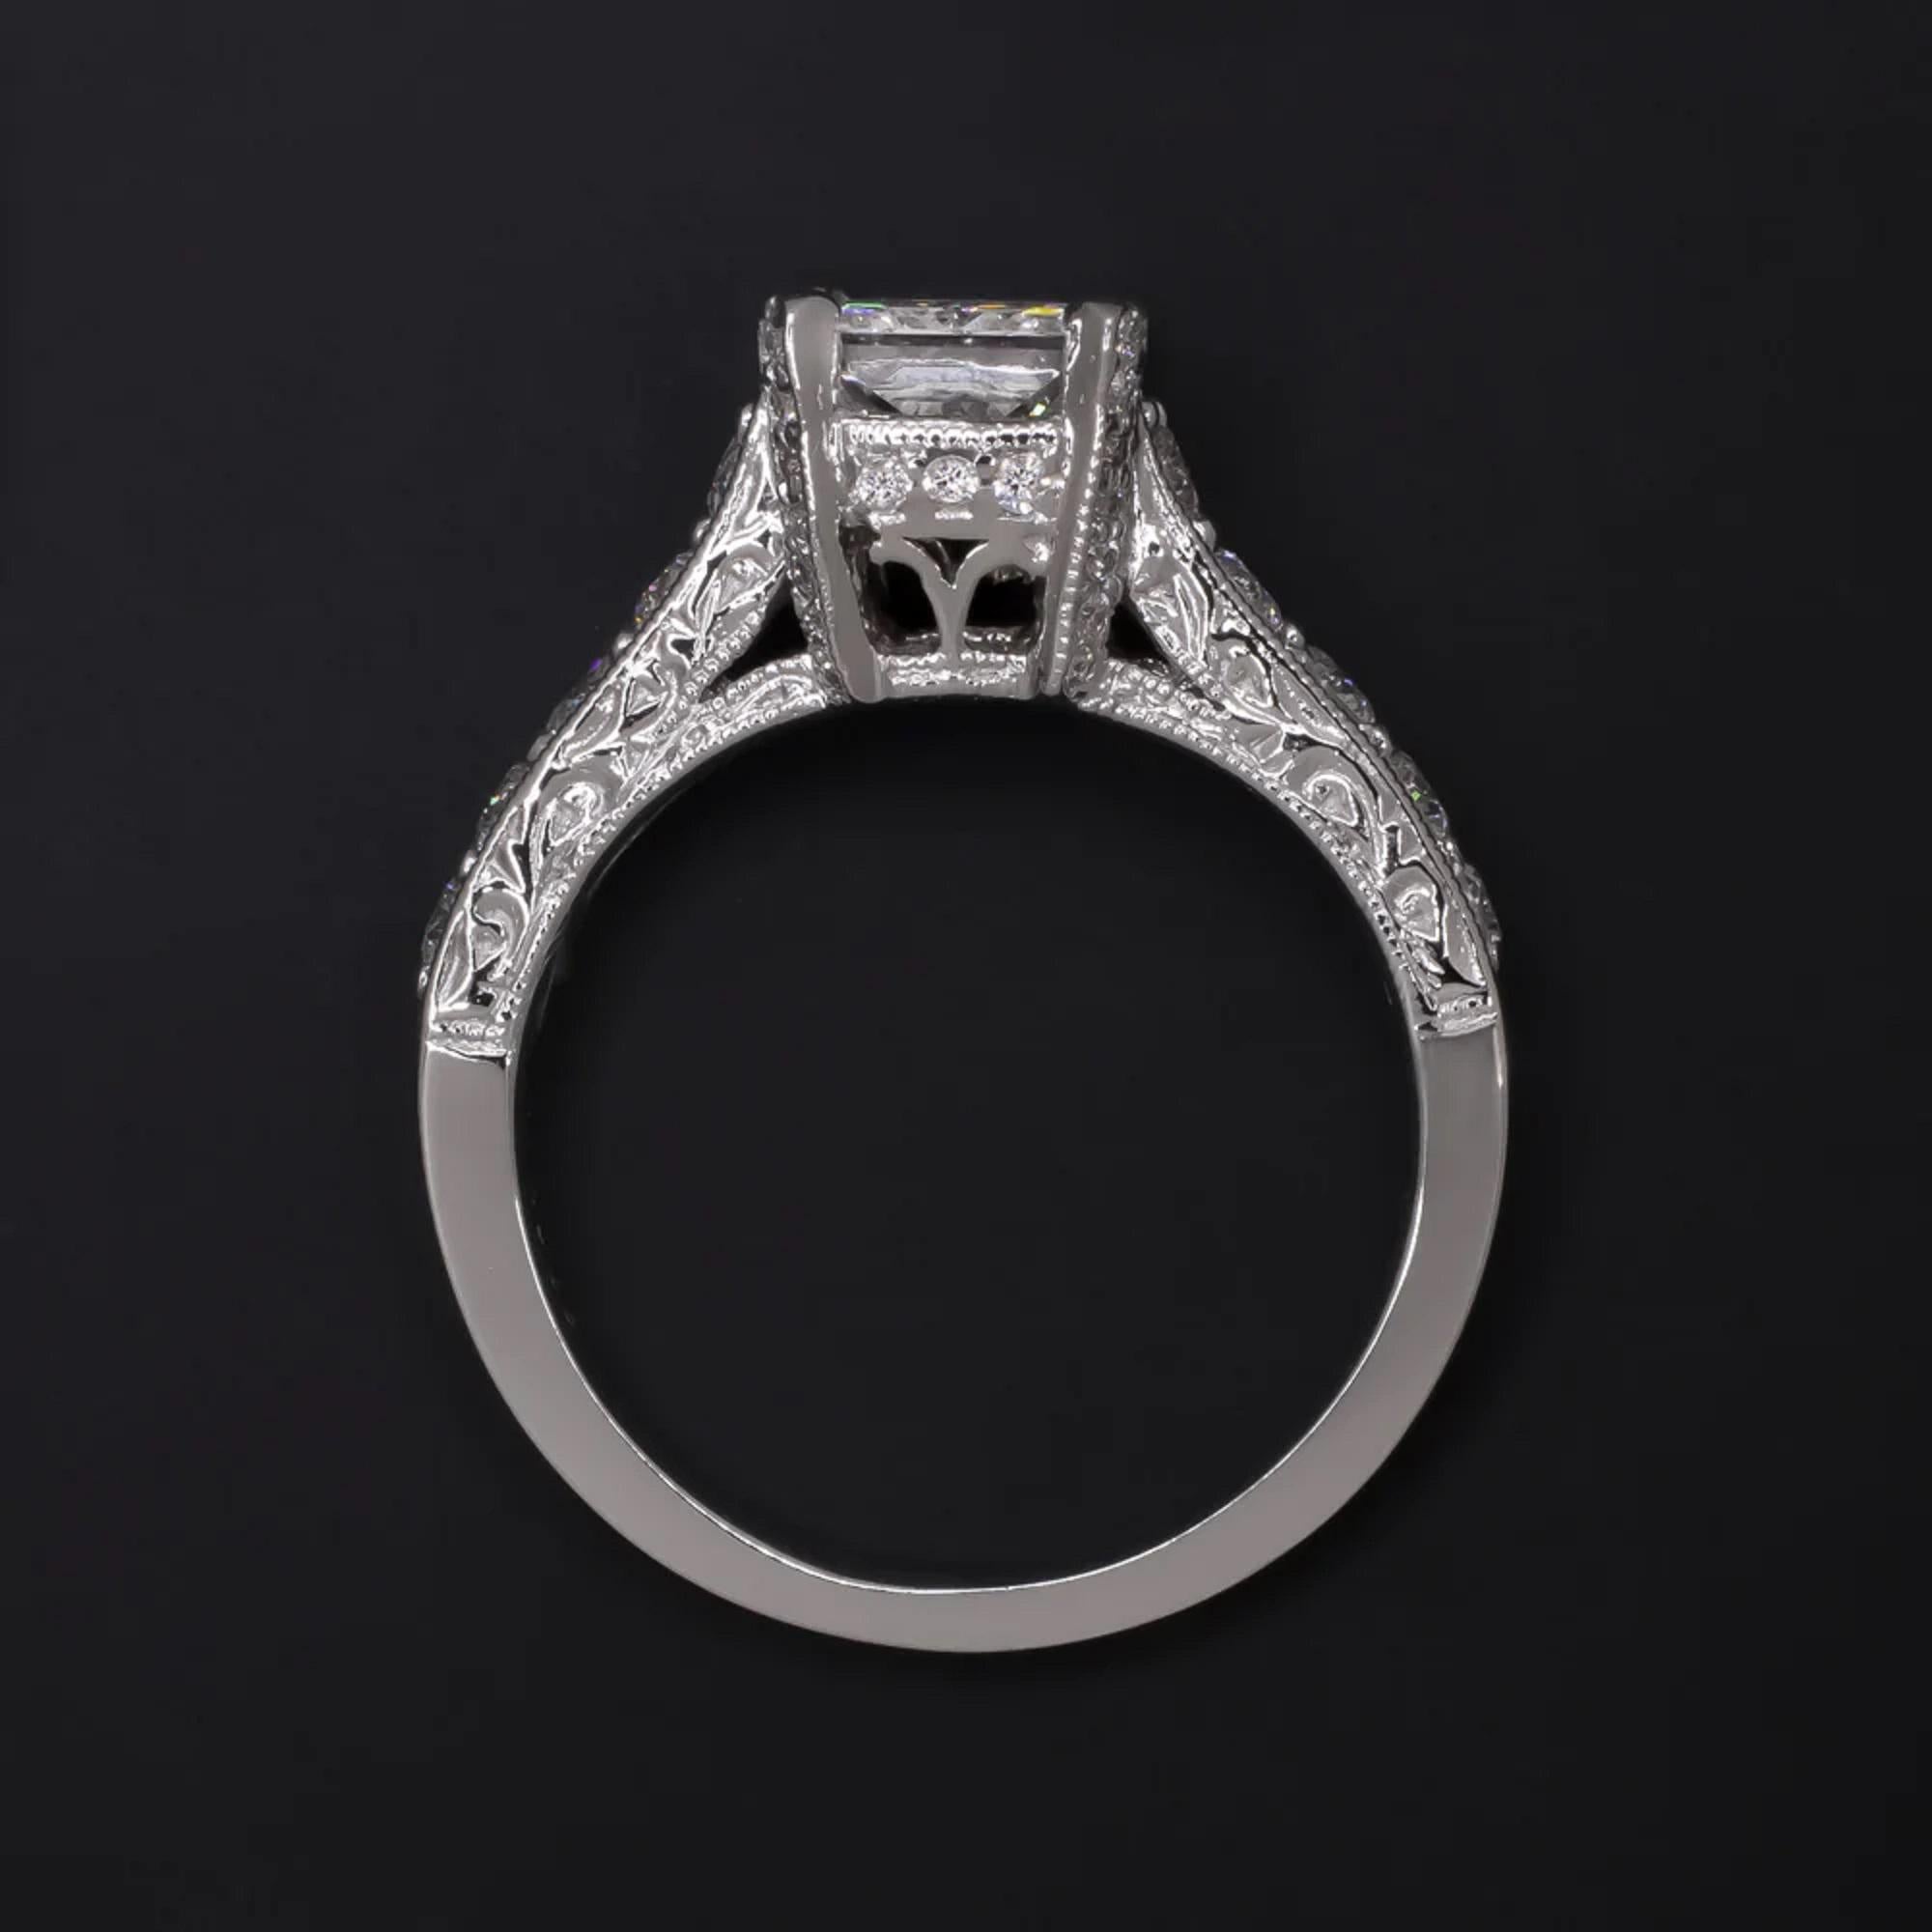 Art Deco GIA Certified Radiant Cut Diamond in a Luxurious 18k White Gold Setting